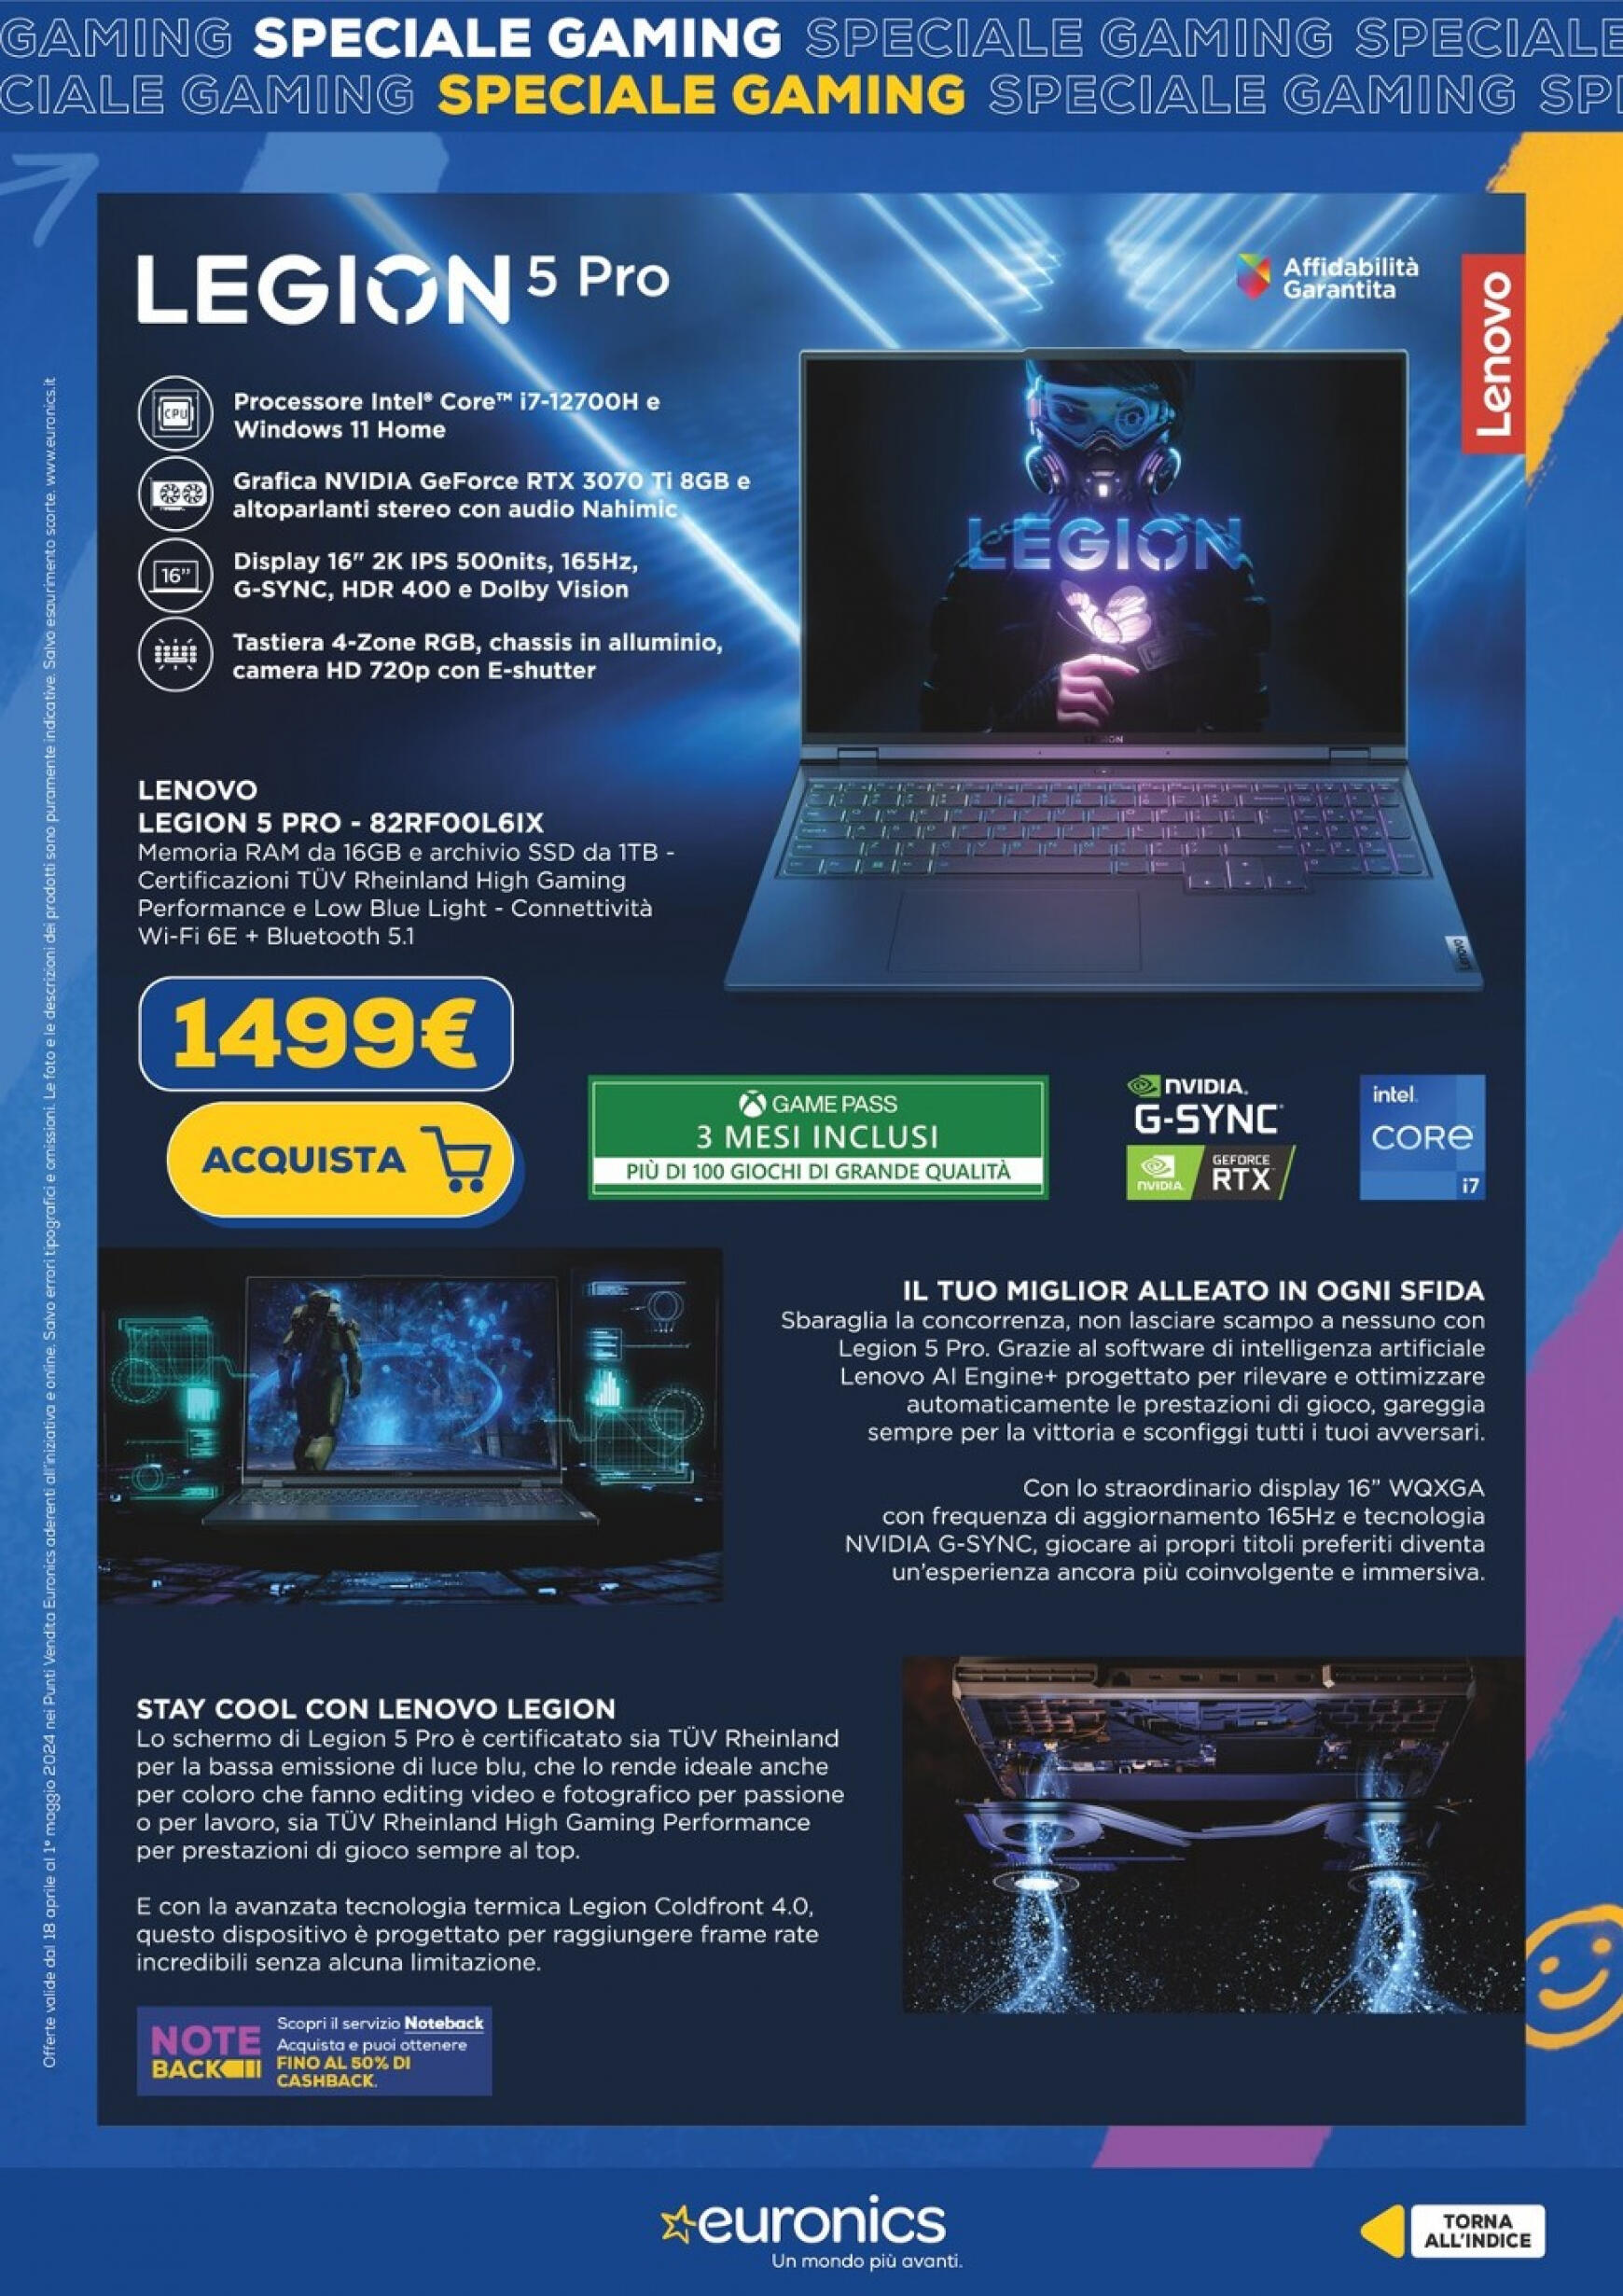 euronics - Nuovo volantino Euronics - Speciale Gaming 18.04. - 01.05. - page: 6